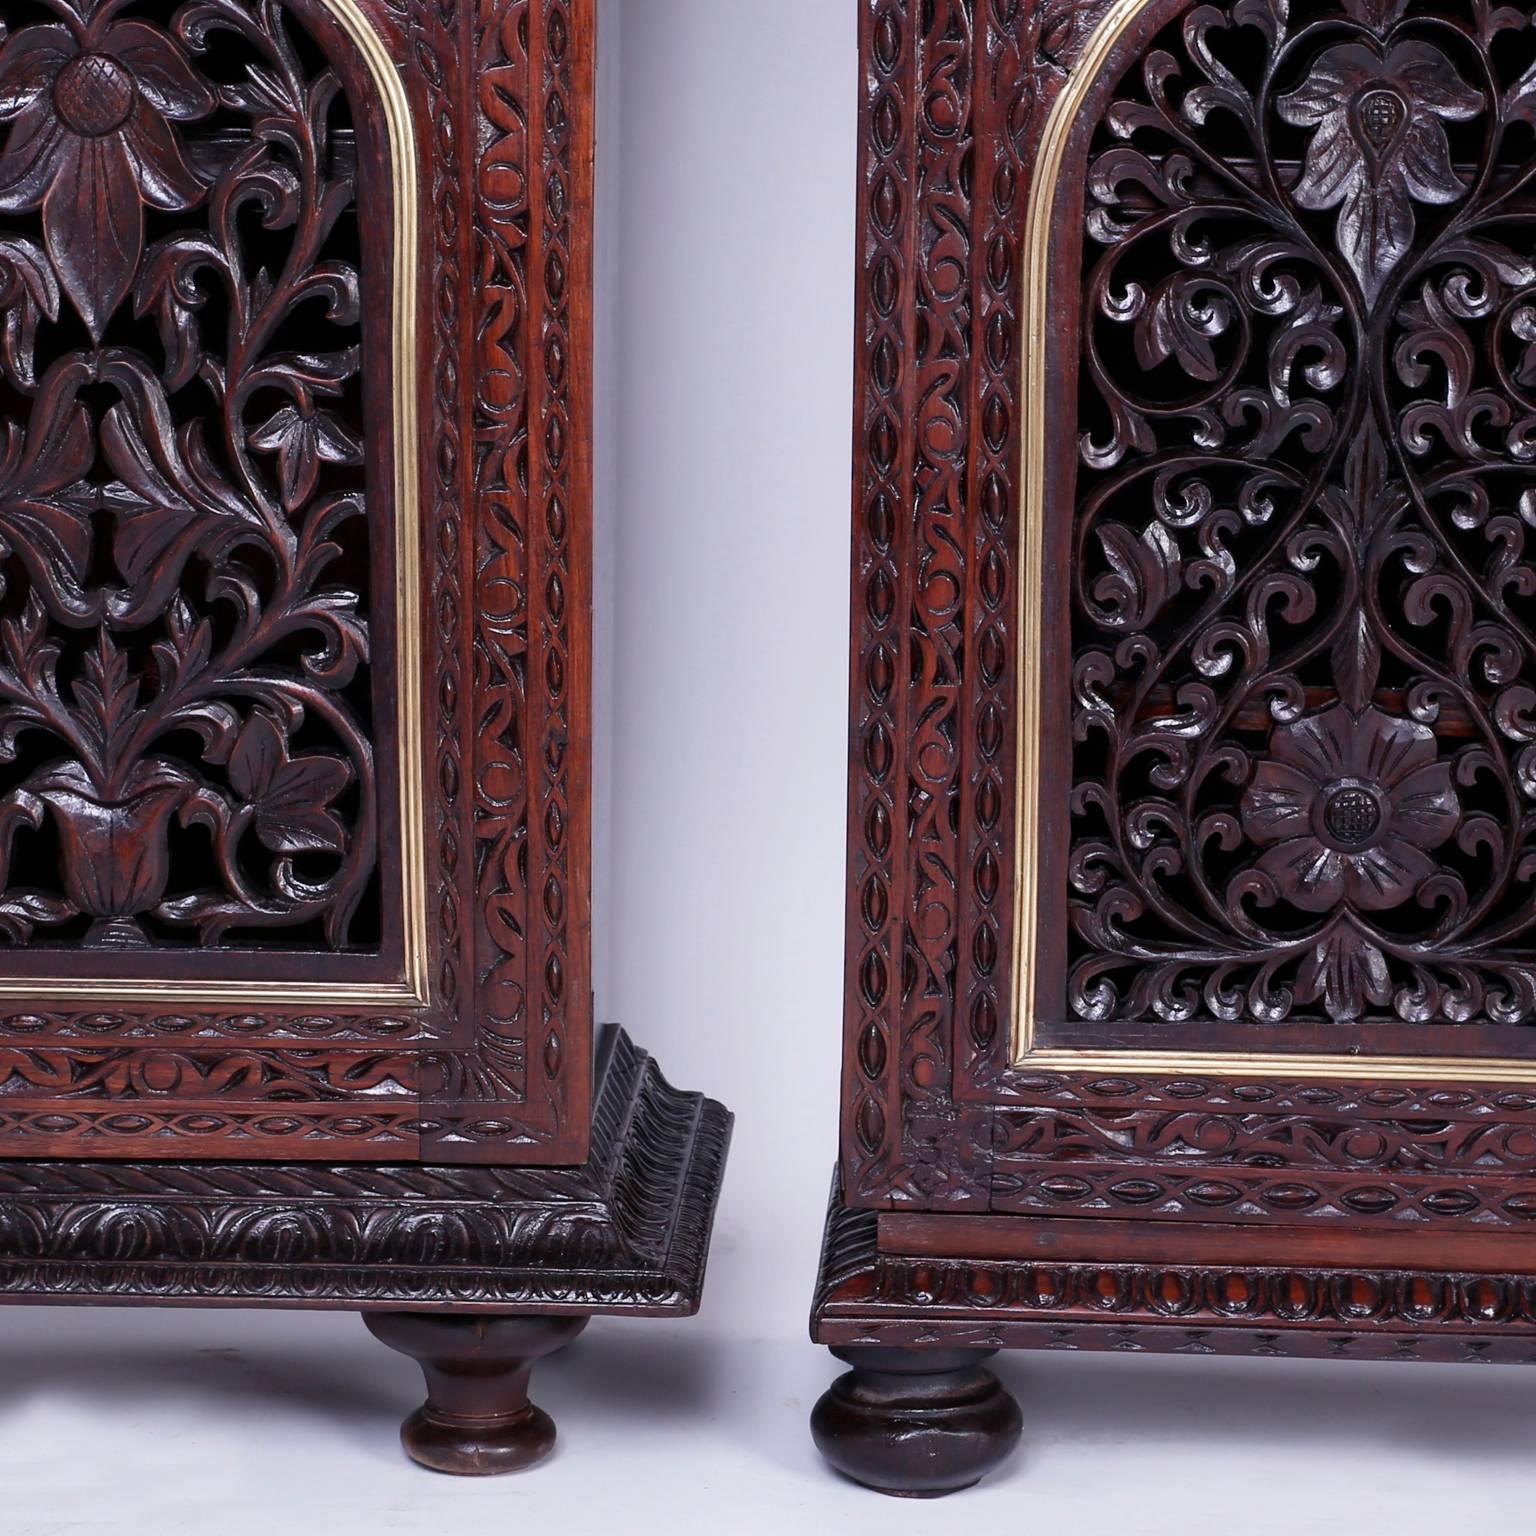 Rare antique pair of Anglo-Indian two-door cabinets with slight artistic differences. Handcrafted in rosewood and featuring expertly carved floral designs on the fronts with brass trimmed arches, both sitting on turned feet. The cabinet on the left